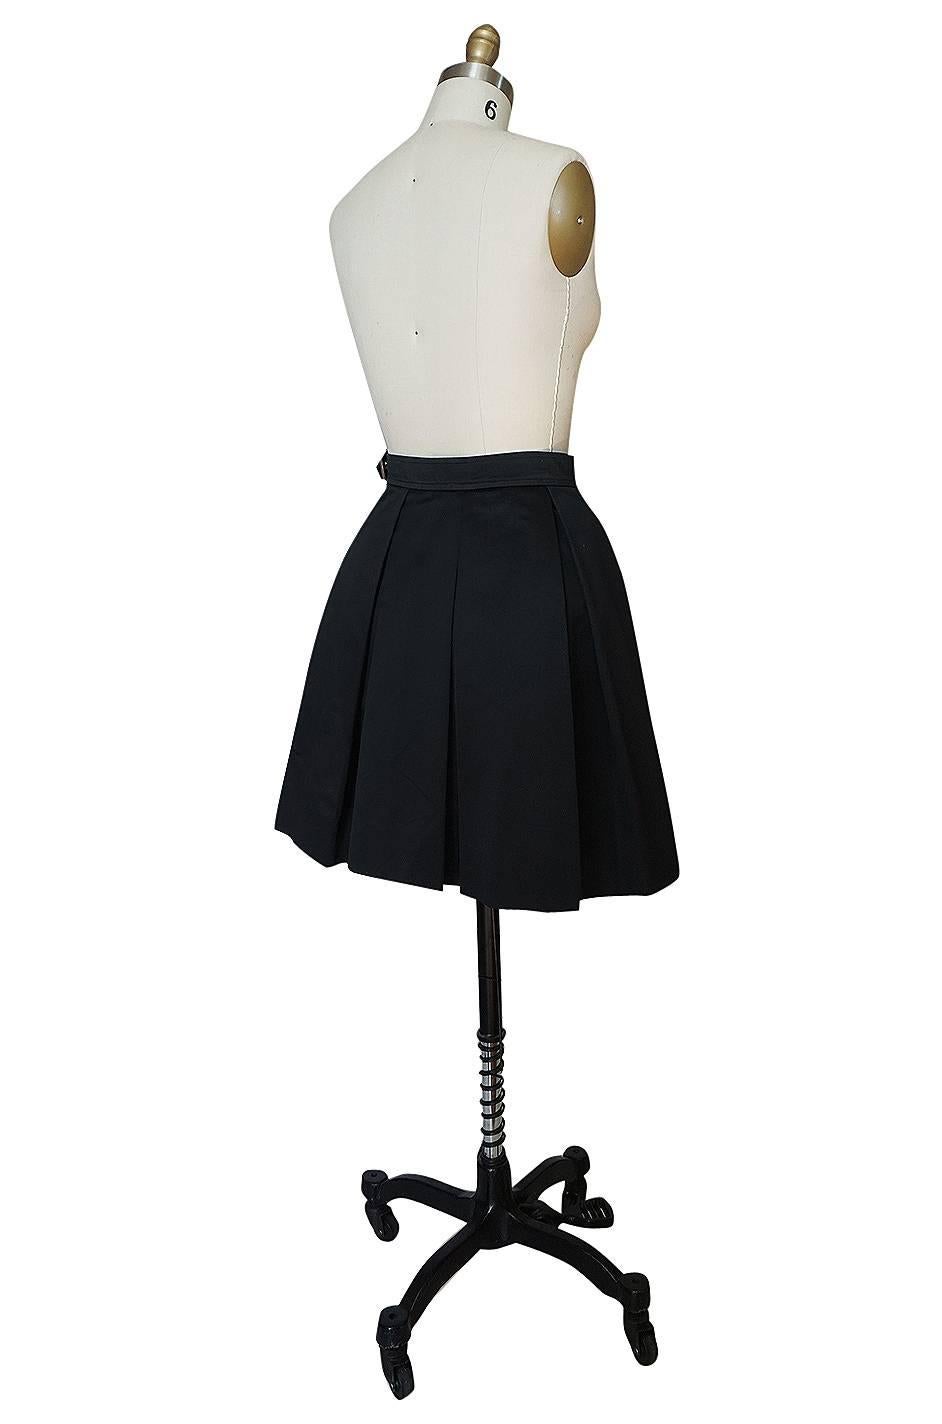 I love this fabulous little pleated mini skirt by Yves Saint Laurent with its schoolgirl feel. It is made of a crisp cotton and a basic black so it can be worn endlessly. The waist cinches in and below that the skirt has a fabulous fullness to it.